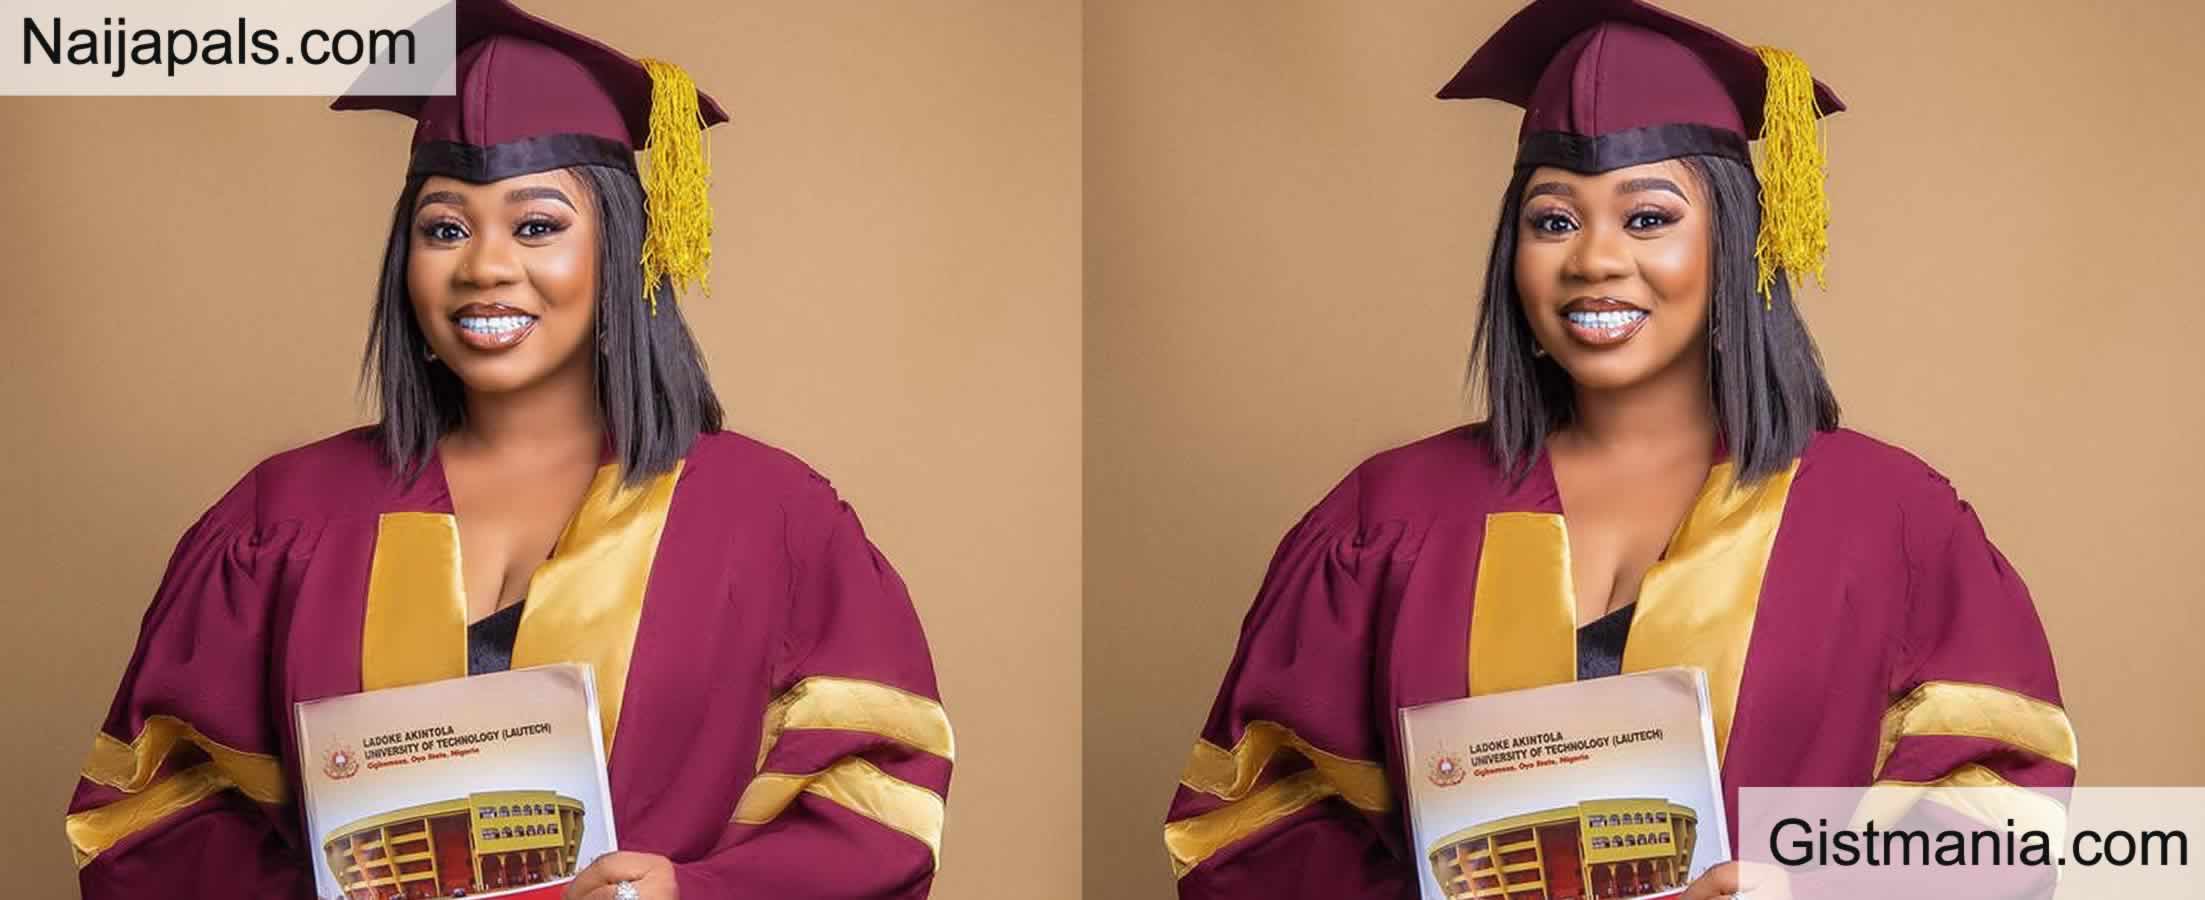 Actress Wumi Toriola Rejoices As She Completes Master’s Degree At Lautech, Shares Photos